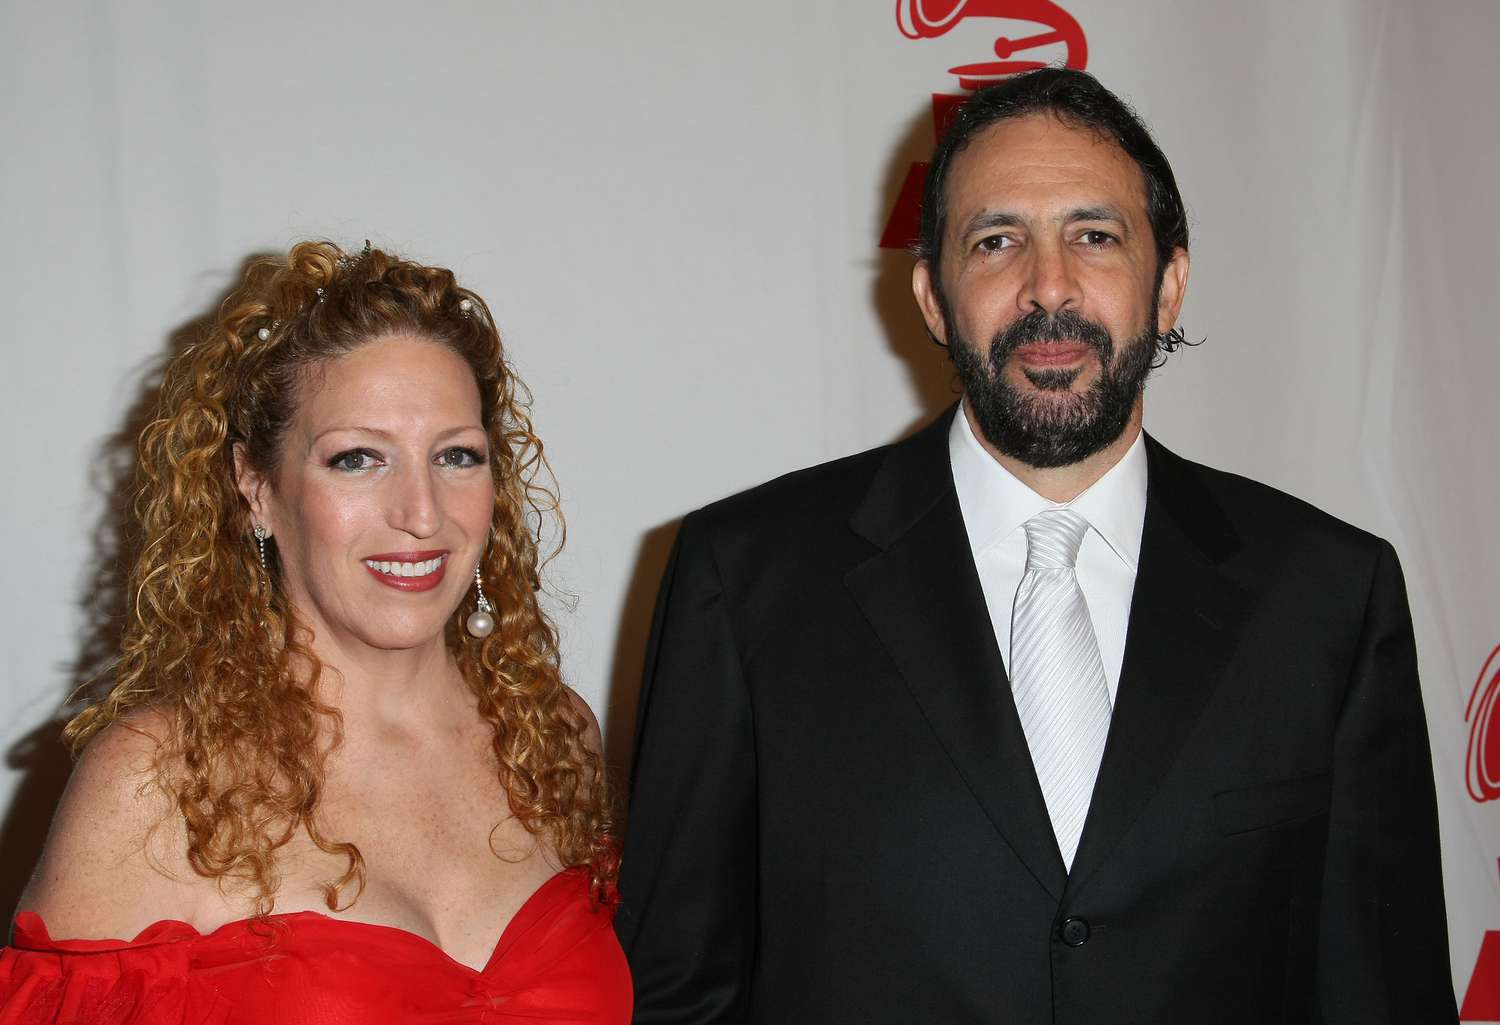 The 8th Annual Latin GRAMMY Awards - Person of the Year Honoring Juan Luis Guerra - Arrivals